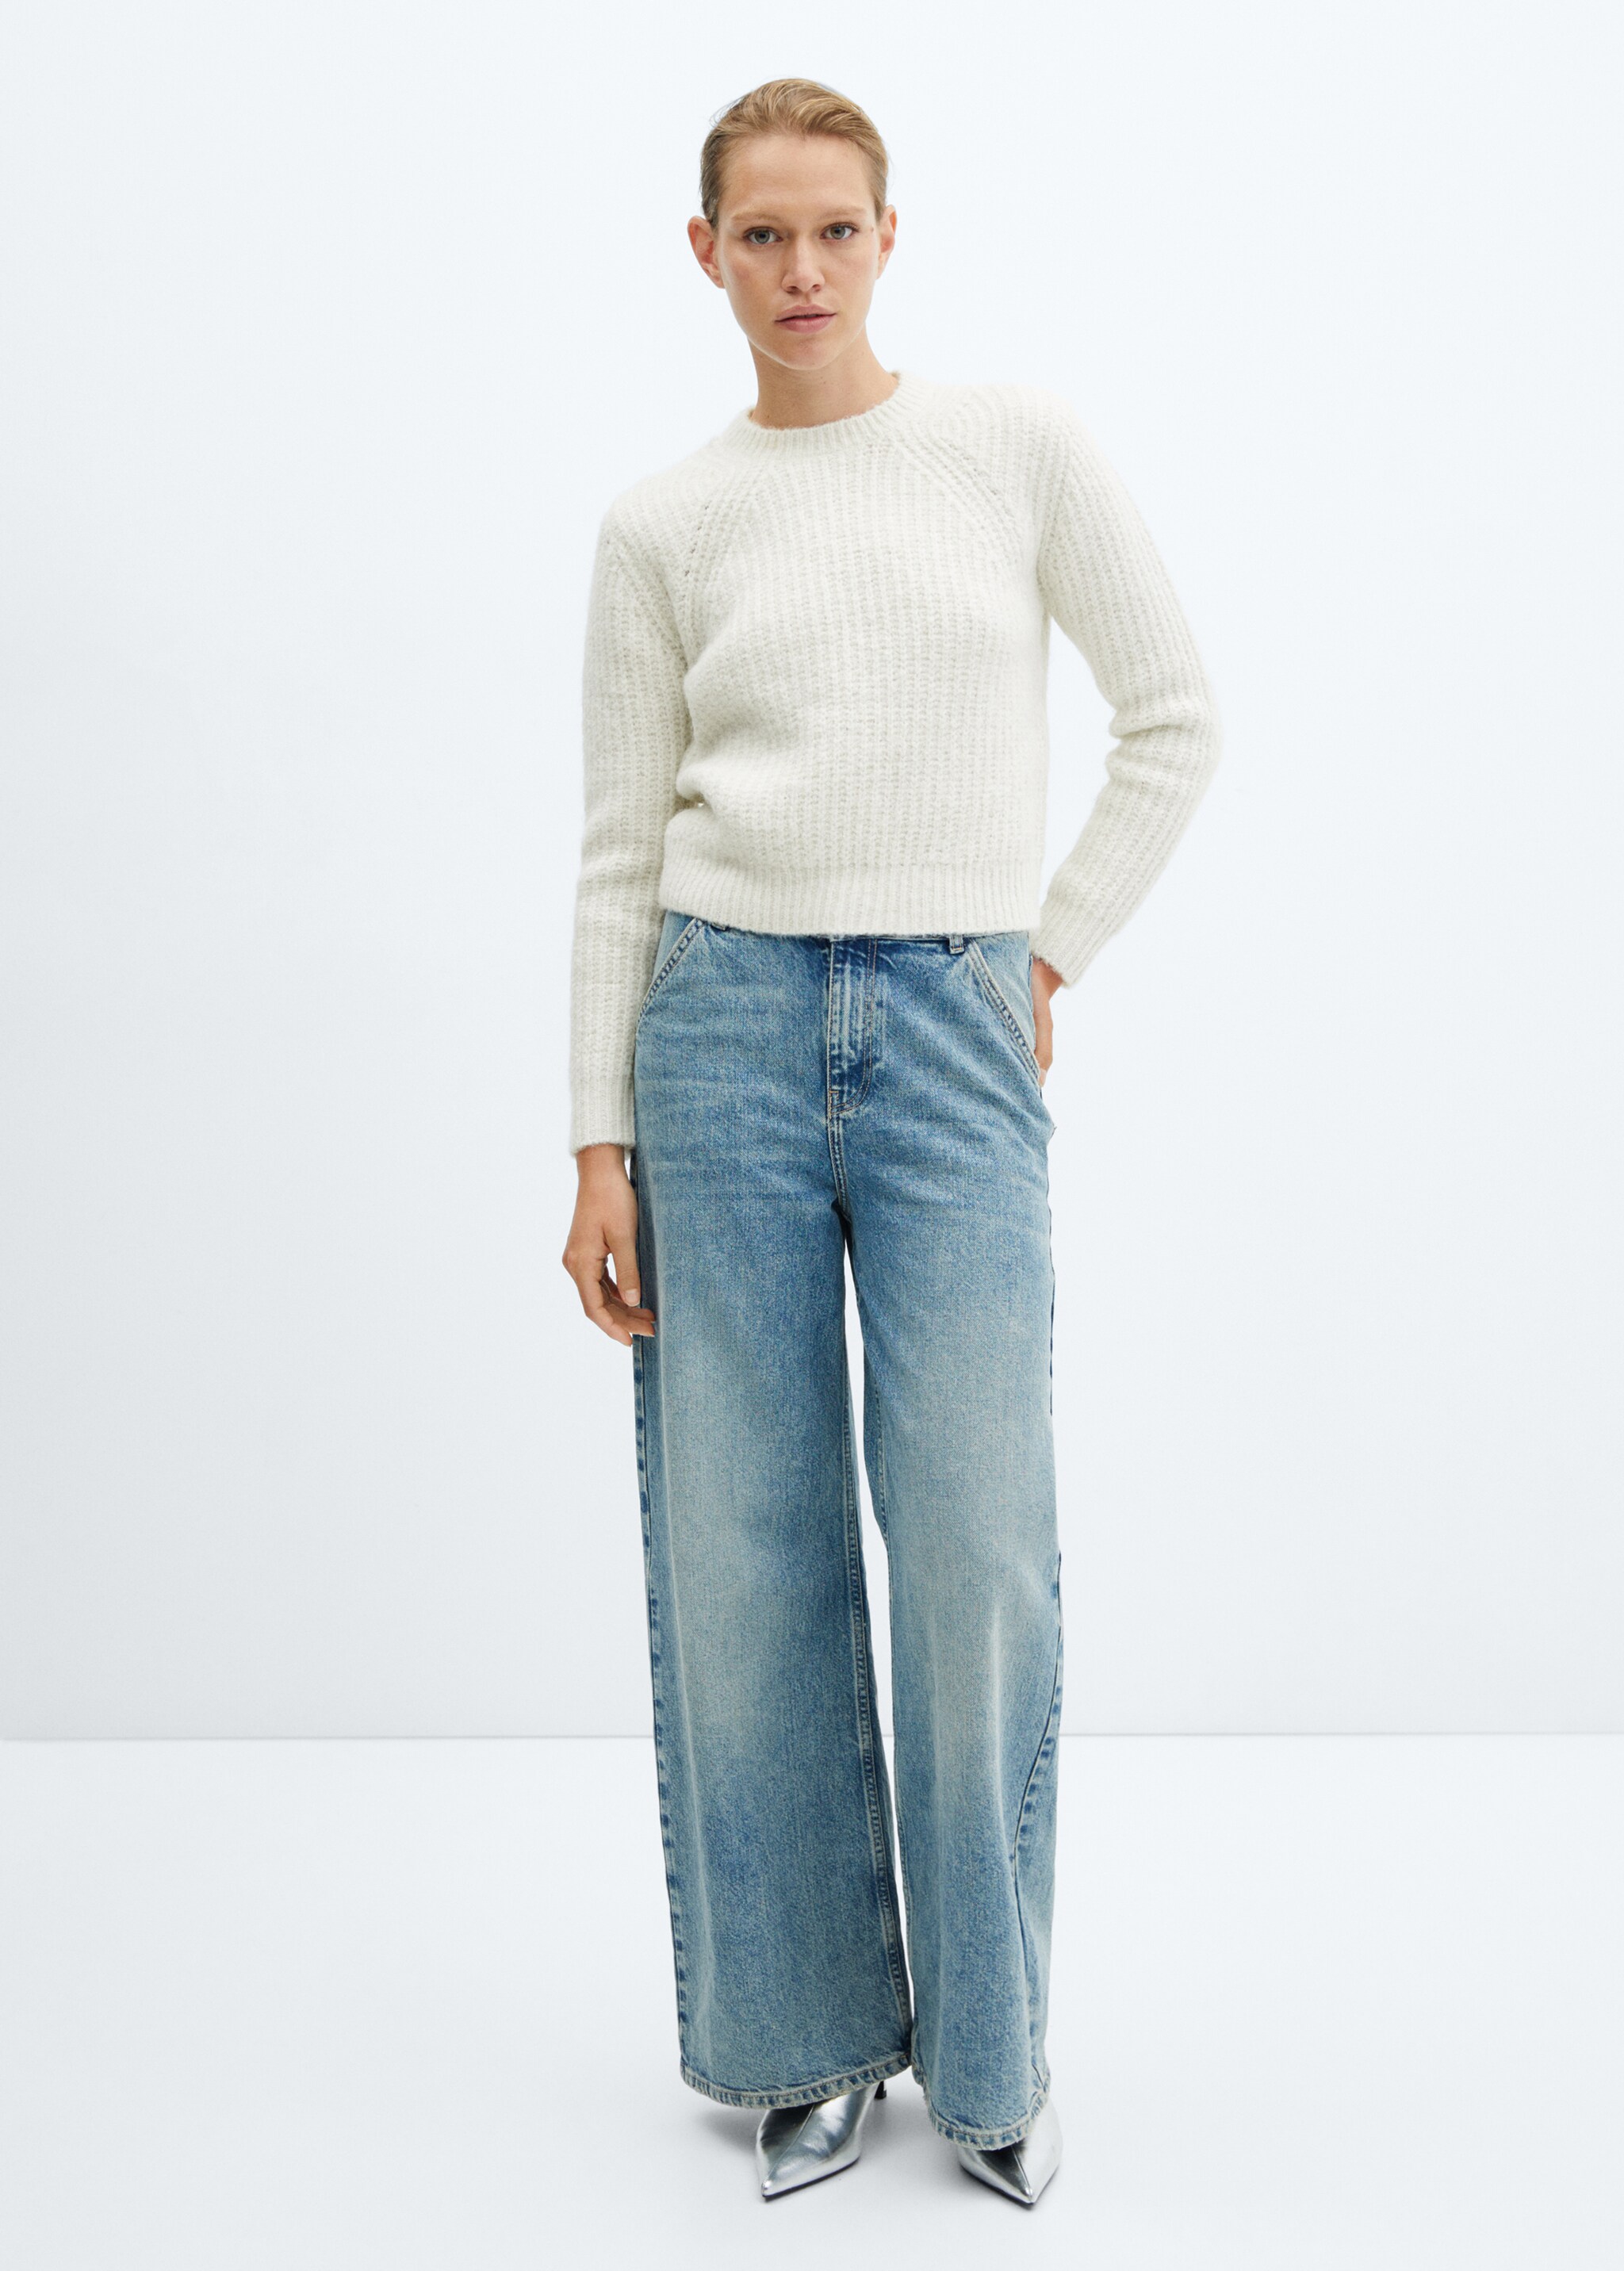 Round-neck knitted sweater  - General plane